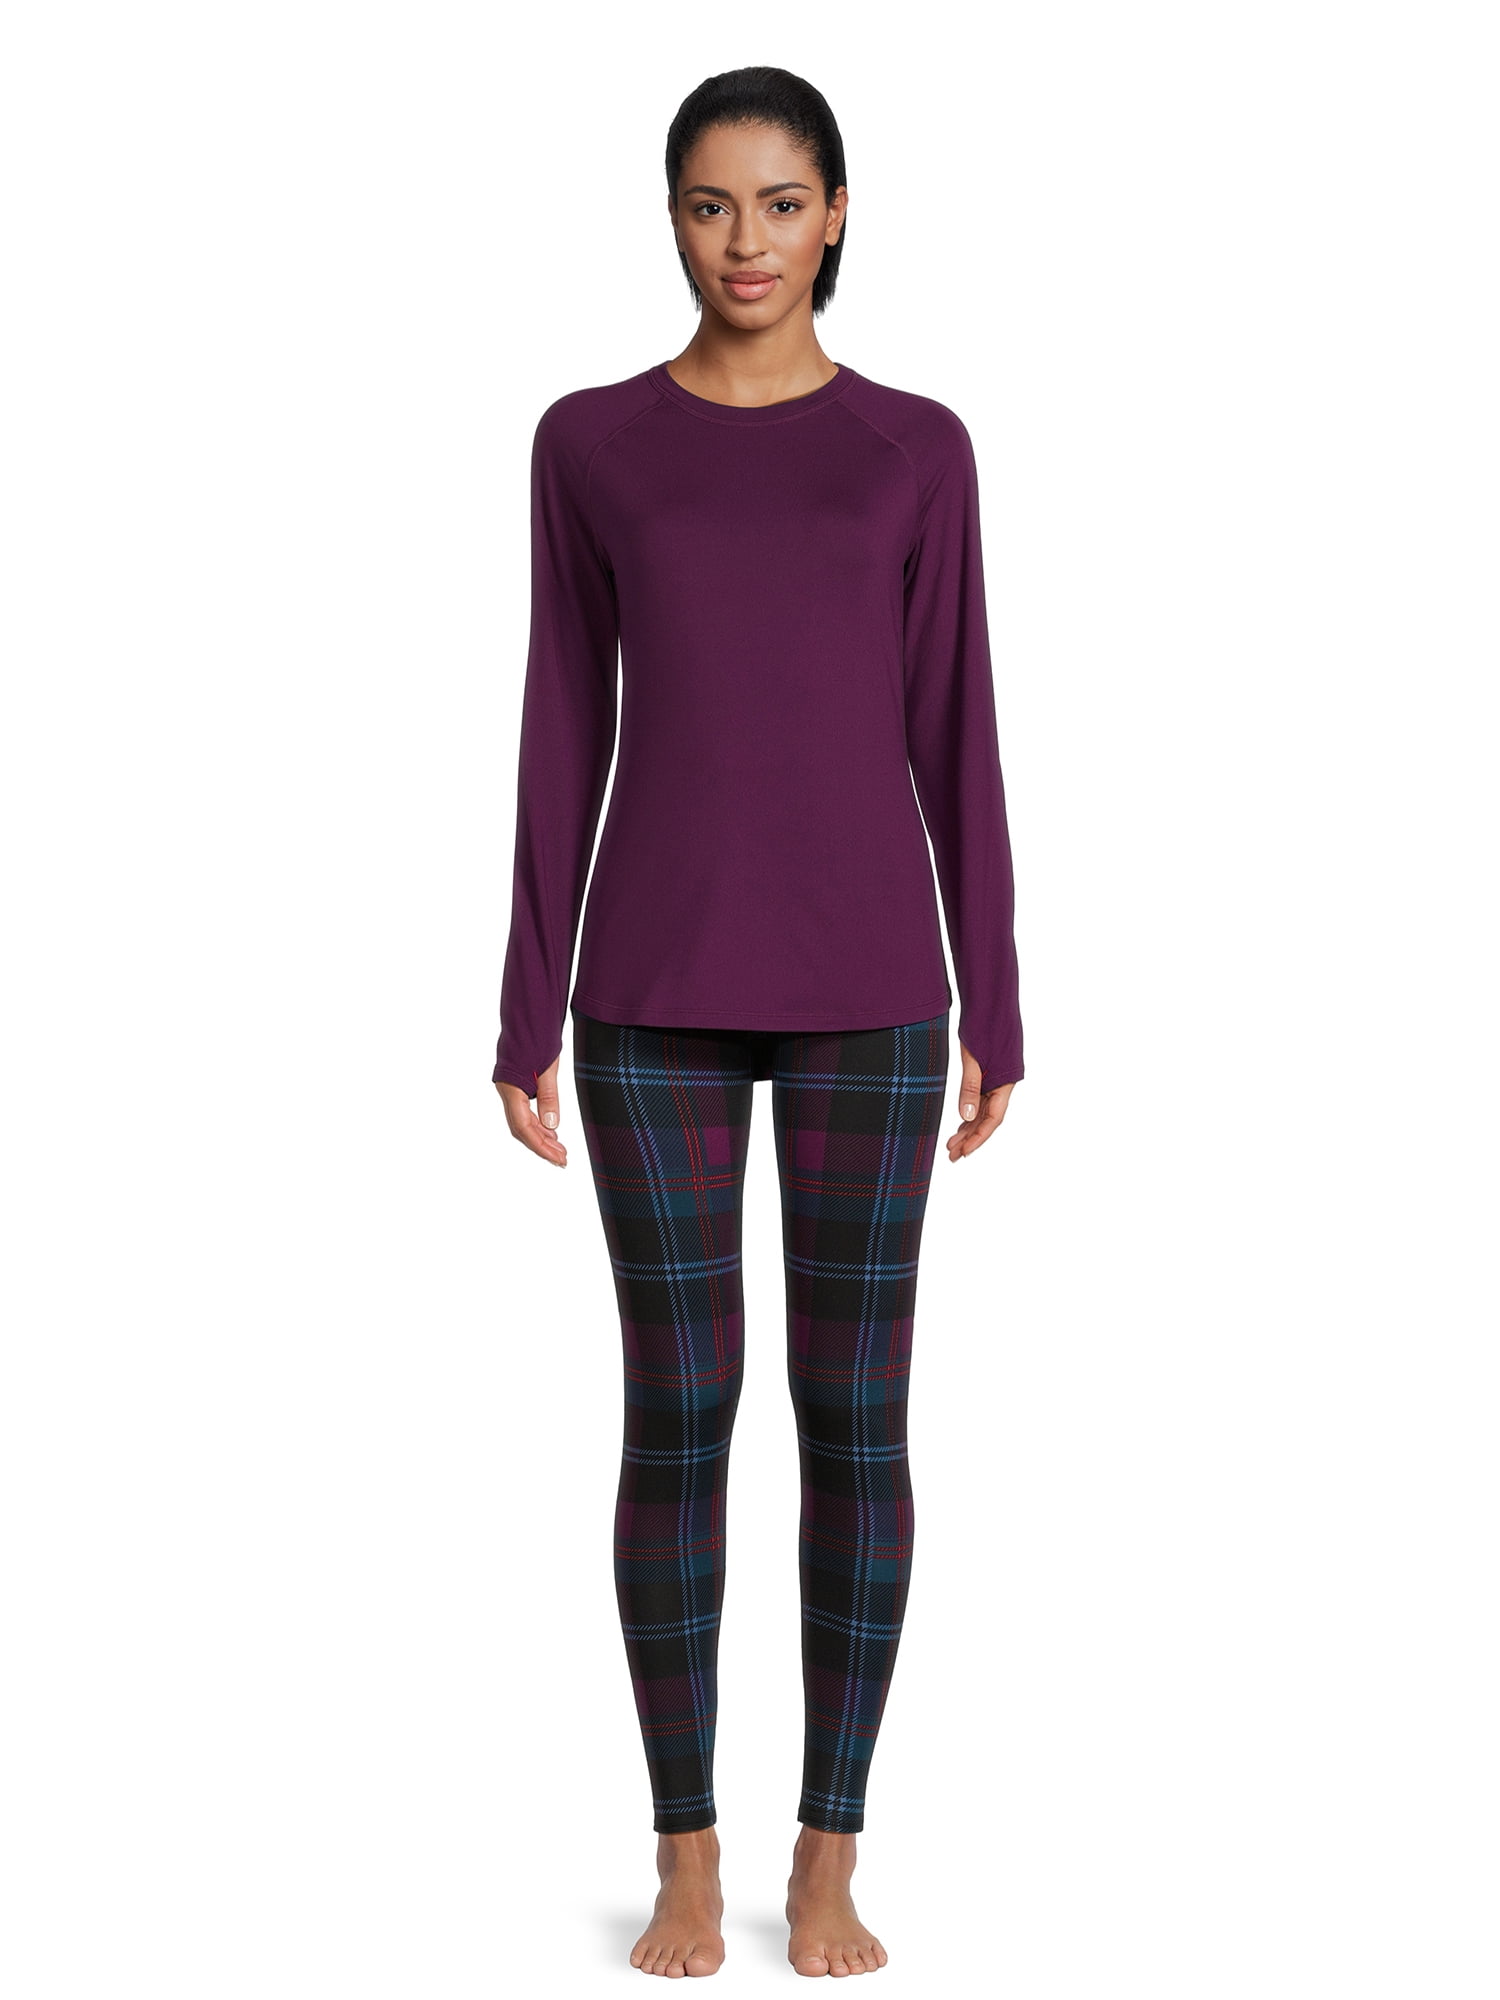 ClimateRight by Cuddl Duds Women's Base Layer Jersey Thermal Top and  Leggings Set, 2-Piece, Sizes XS-XXL 